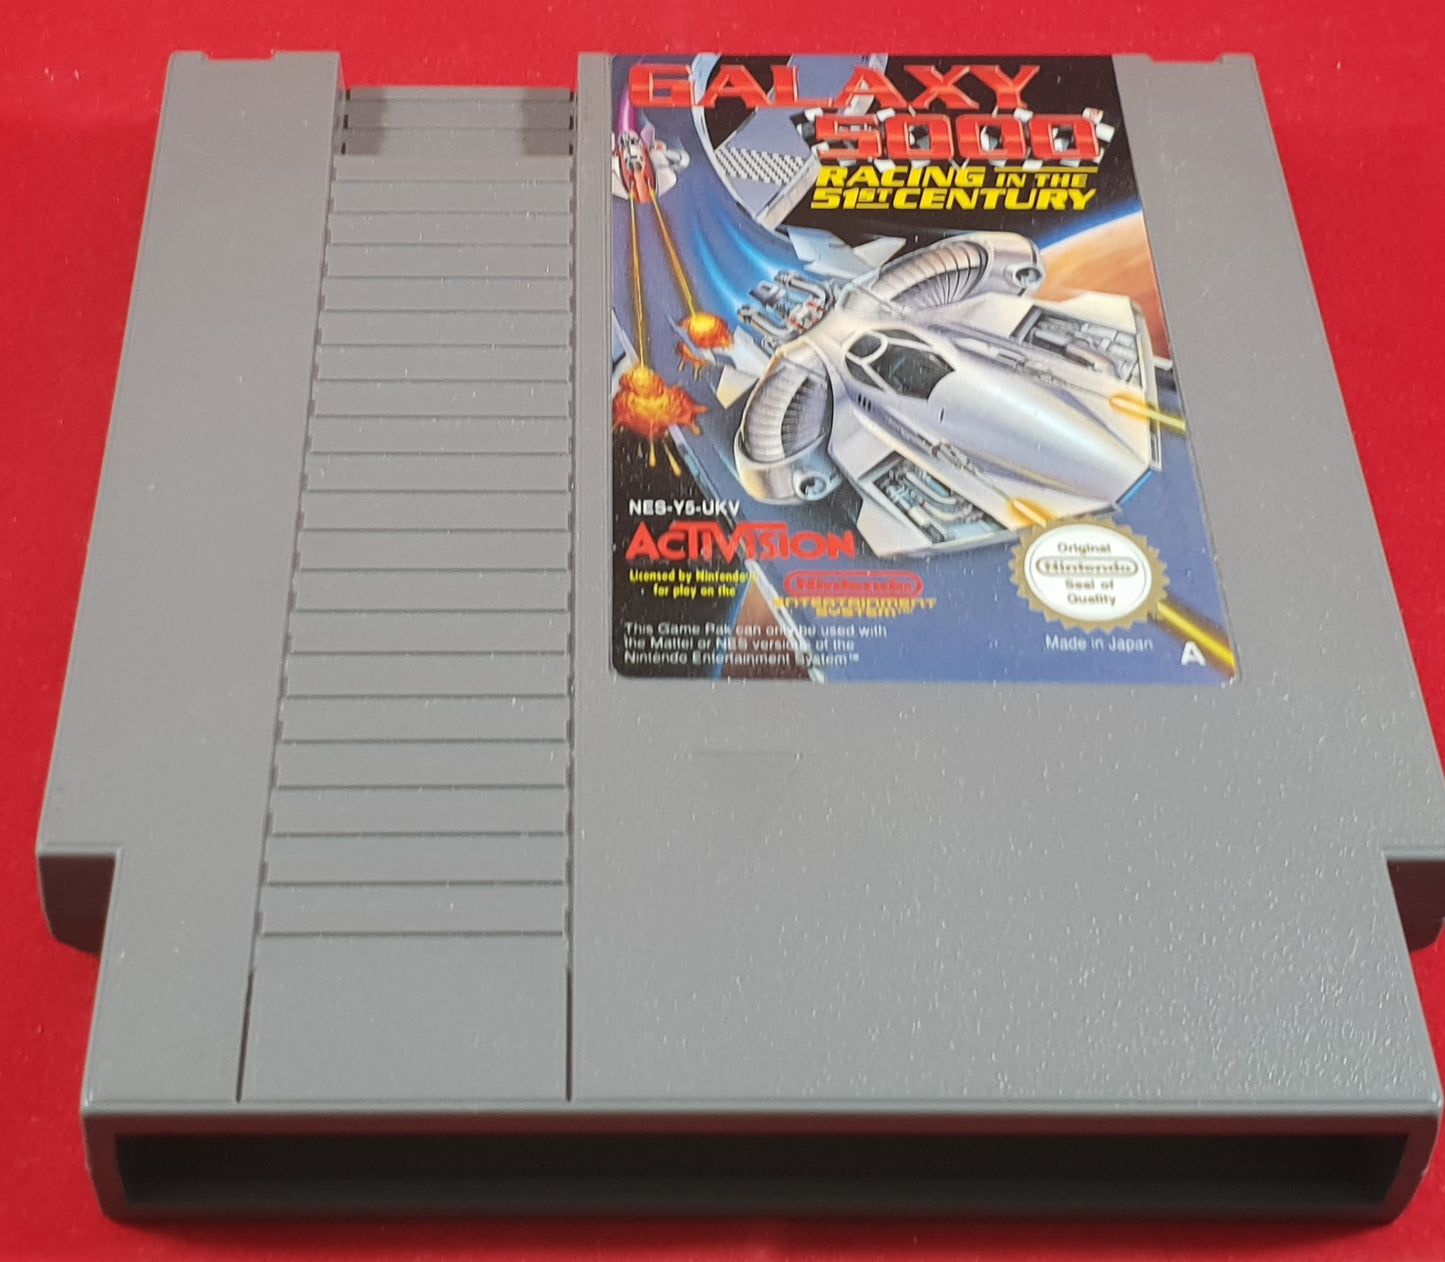 Unboxed Galaxy 5000 NES (Nintendo Entertainment System) game